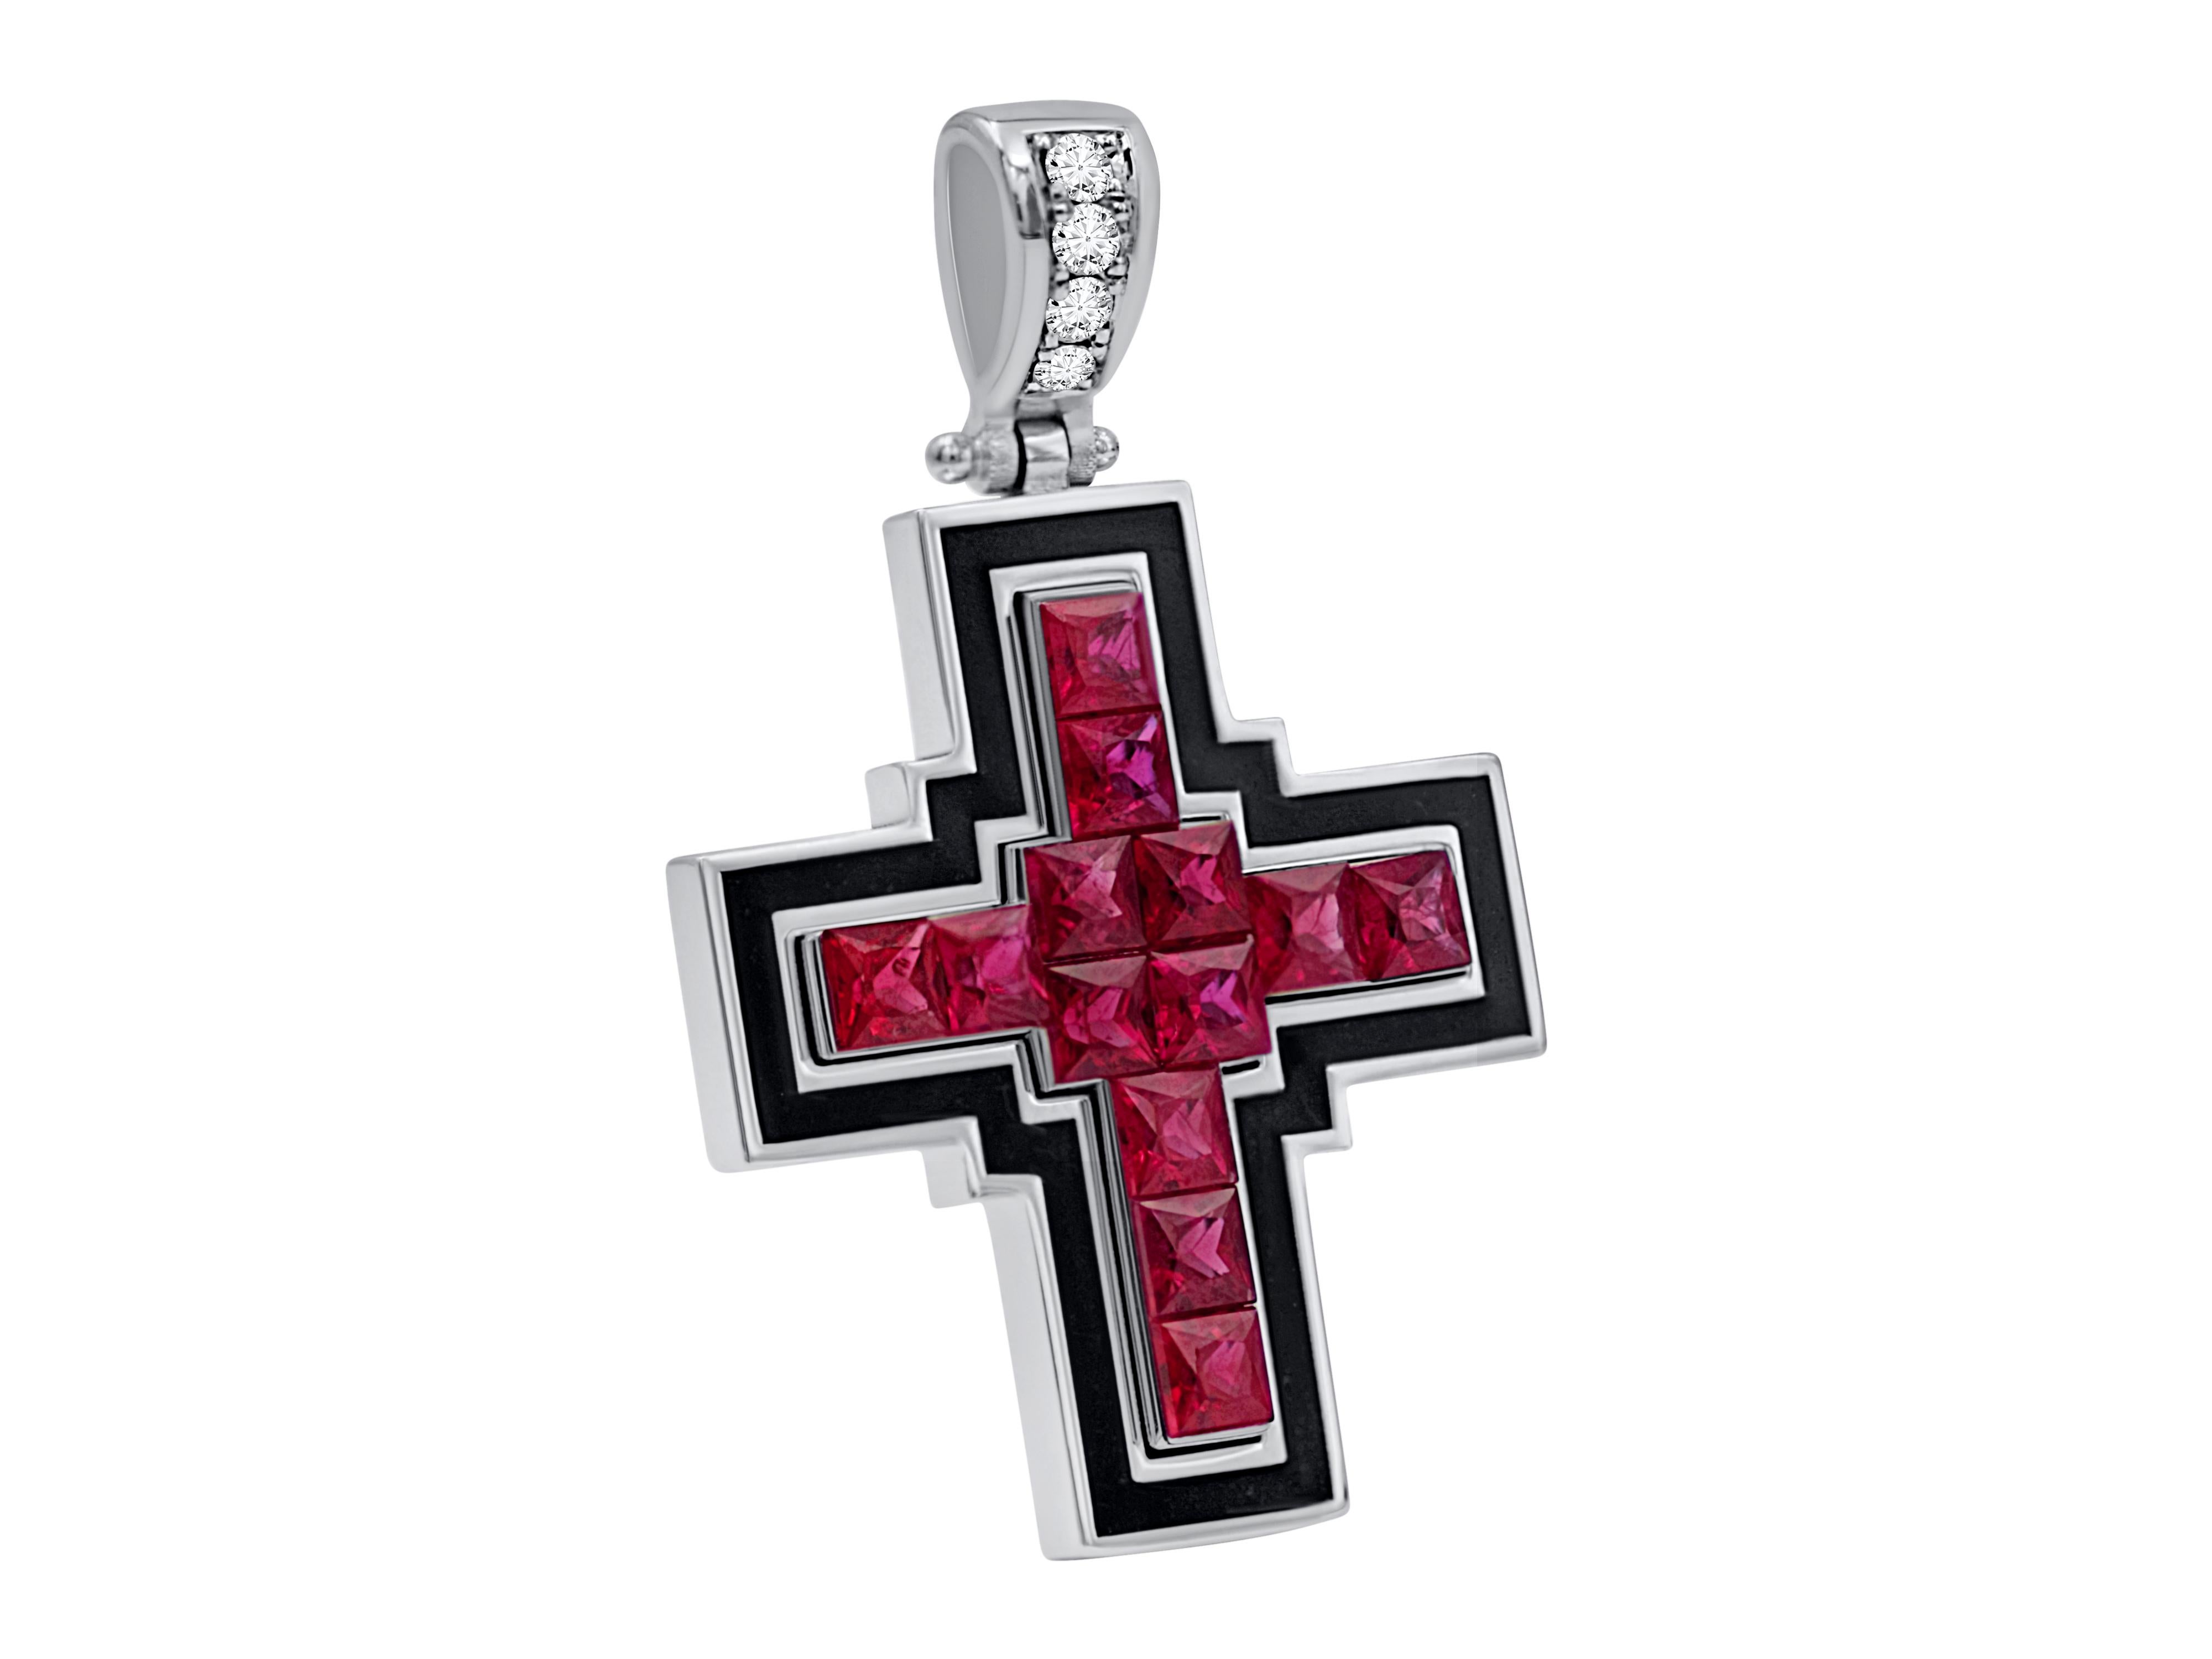 18k white gold cross made with an excellent precision of 1.67 carats princess cut Rubies that follow the design and sets with the invisible setting. A setting that can only accept the most precise cuts of stones. The outer frame host black enamel